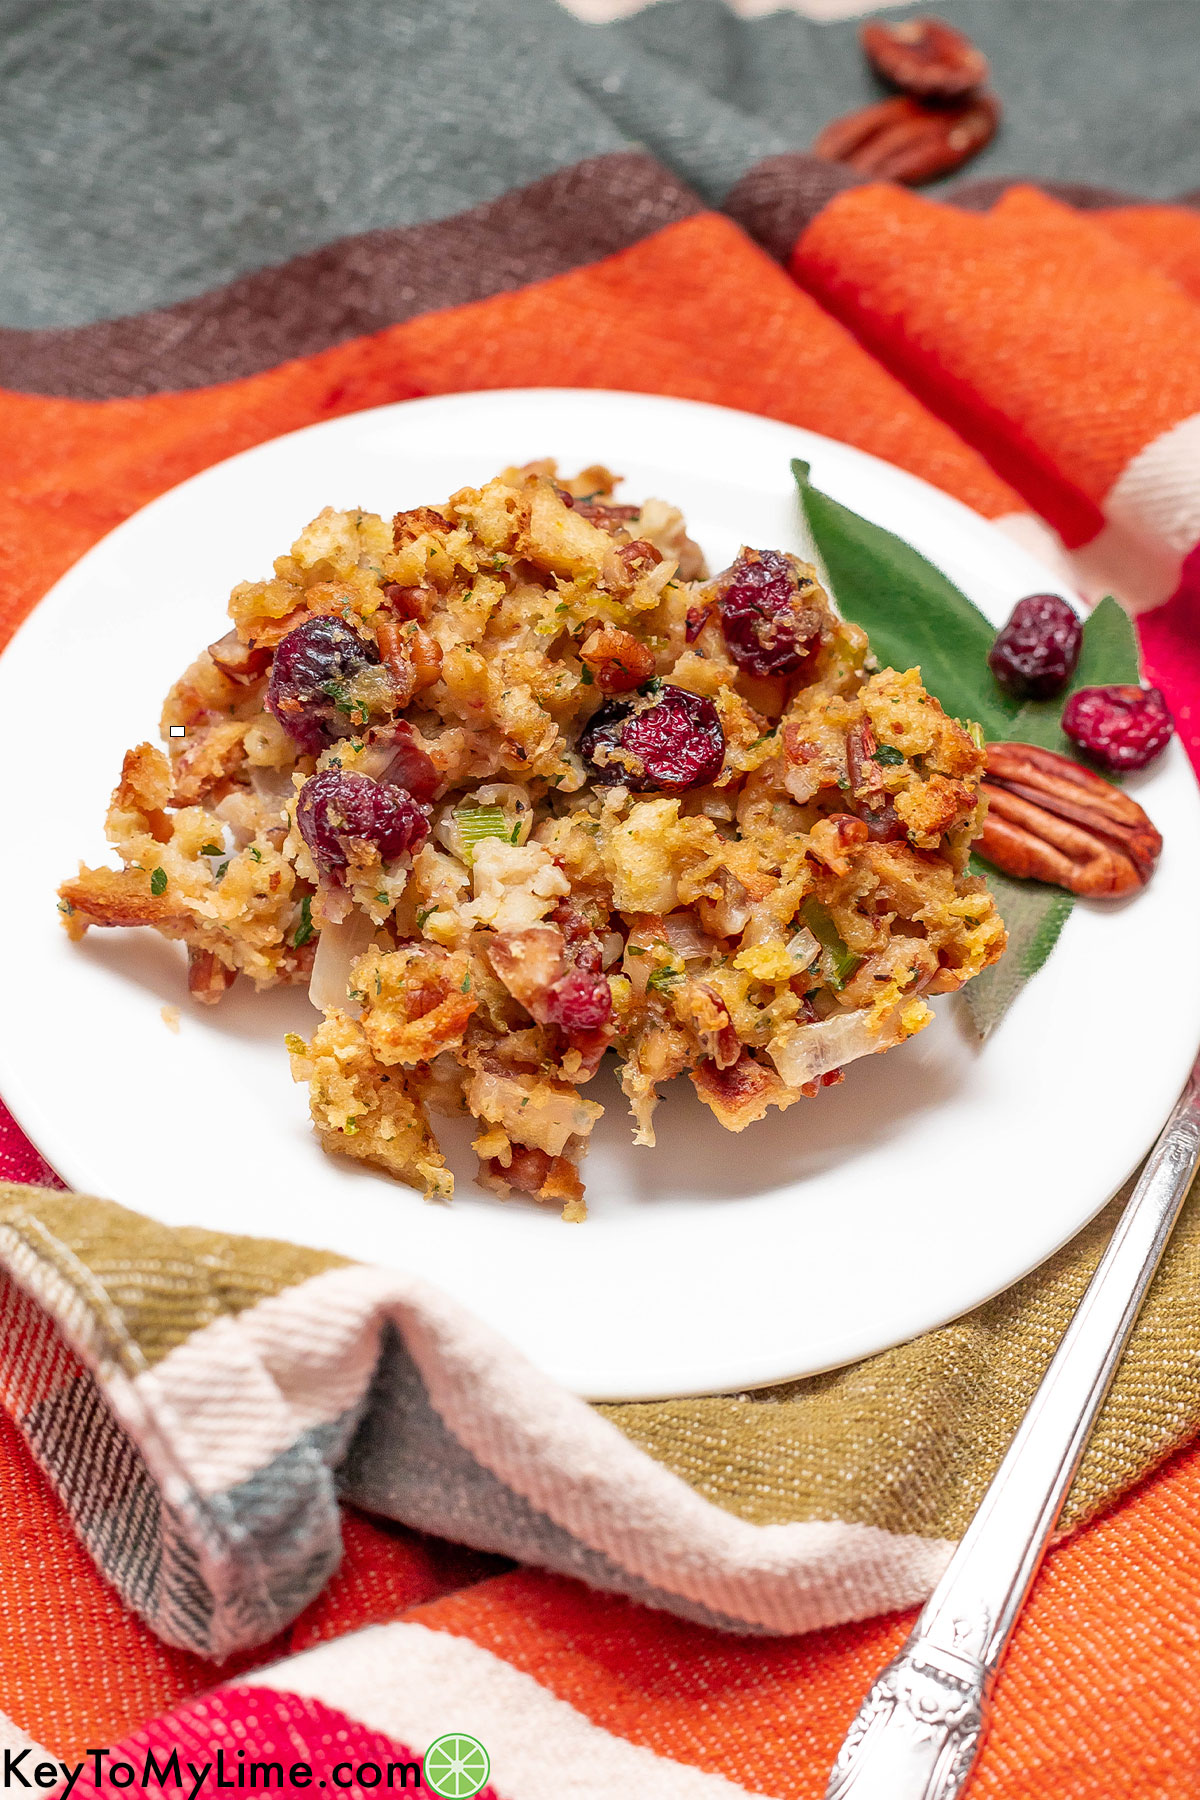 A serving of baked stove top stuffing on a plate garnished with safe, cranberries, and pecans.